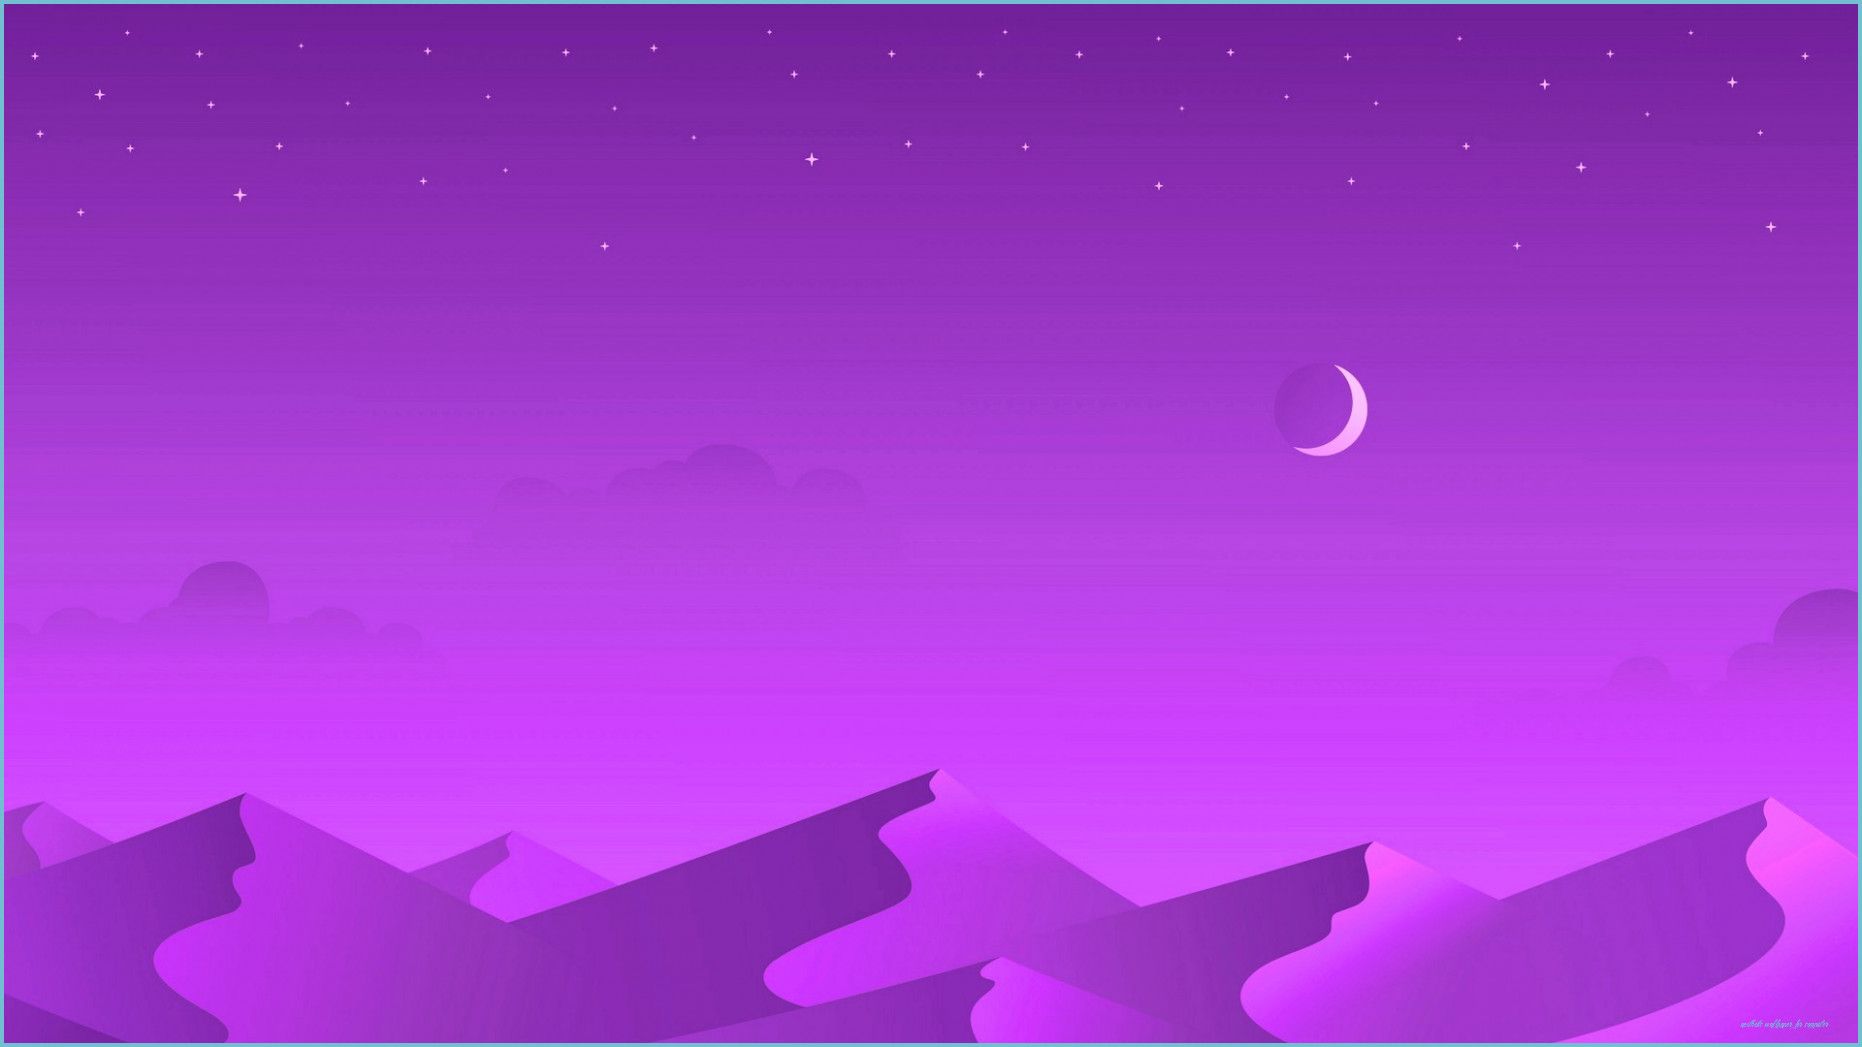 A purple sky with a crescent moon and stars above a purple mountain range - Computer